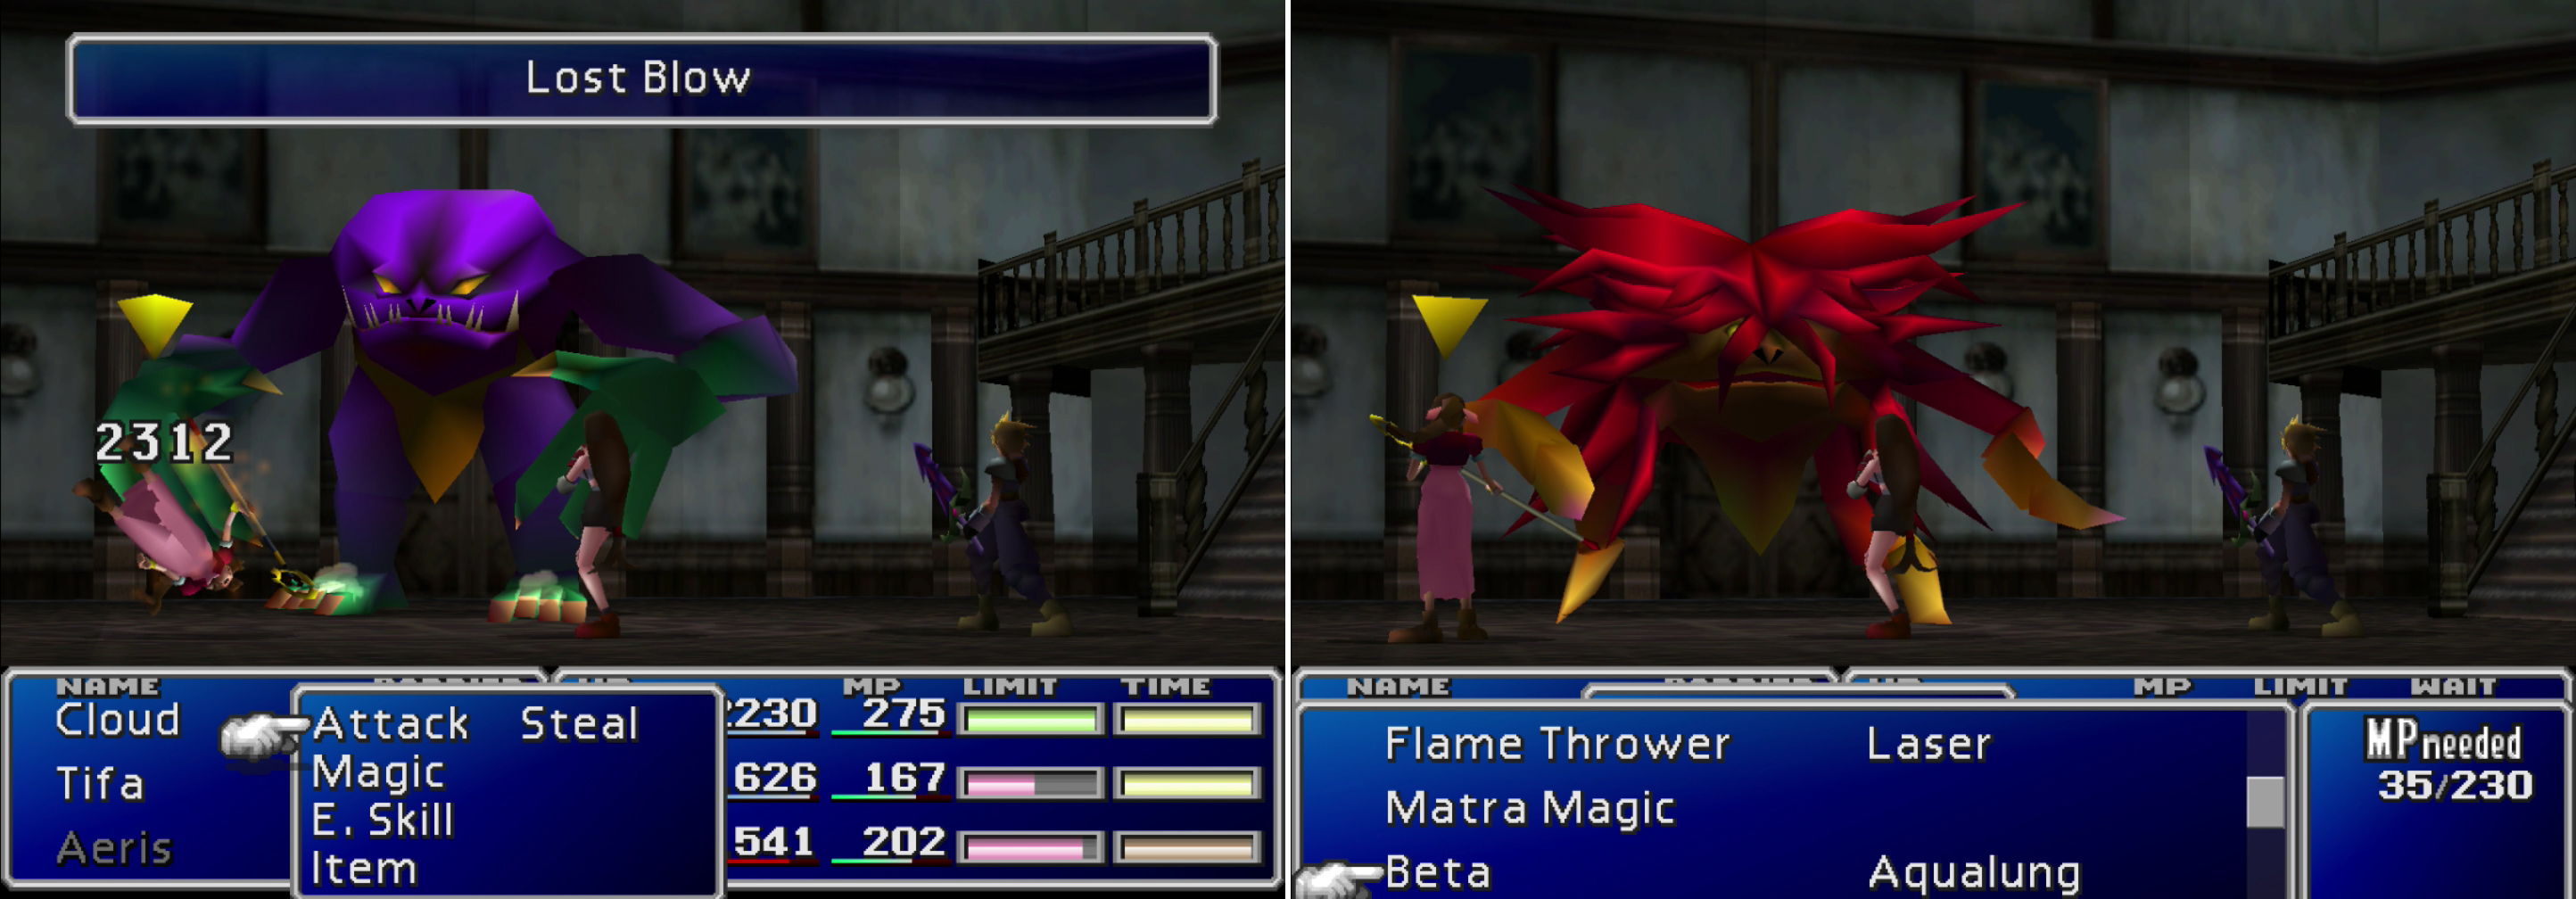 Depending on what type of damage (phyisical or magical) you deal to Lost Number at the beginning of the fight, itll turn into either its purple (left) or red (right) form later on. Considering the power of its Lost Blow attack (also left), its wiser to try to trigger its red form.